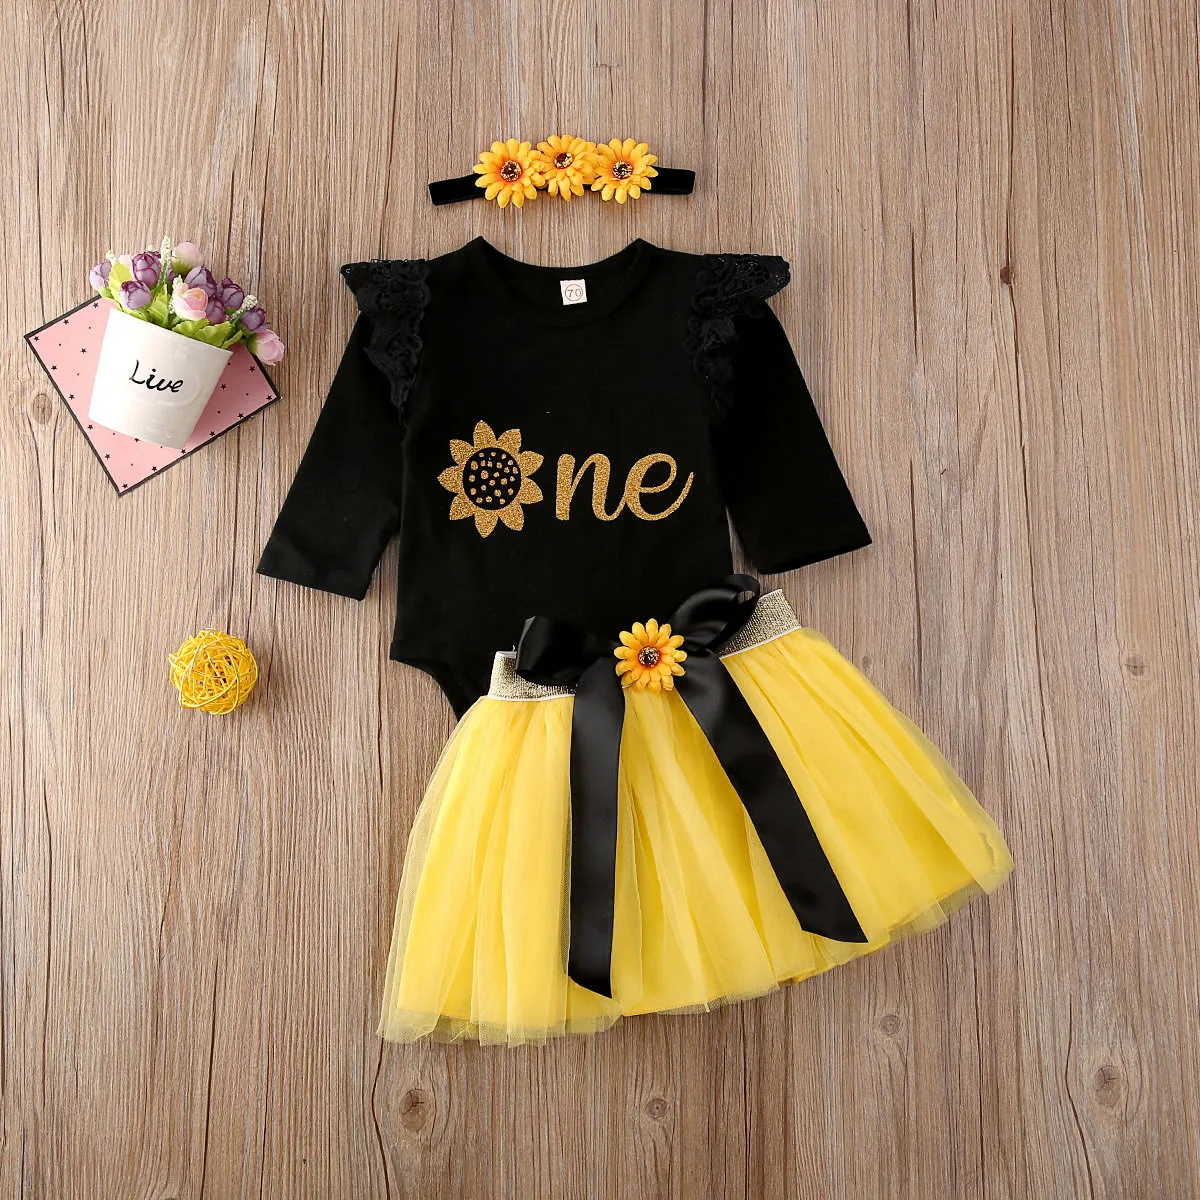 

Pudcoco Newborn Baby Girl Clothes 1st Birthday Lace Fly Sleeve Romper Tops Tutu Tulle Skirt Headband 3Pcs Outfits Clothes